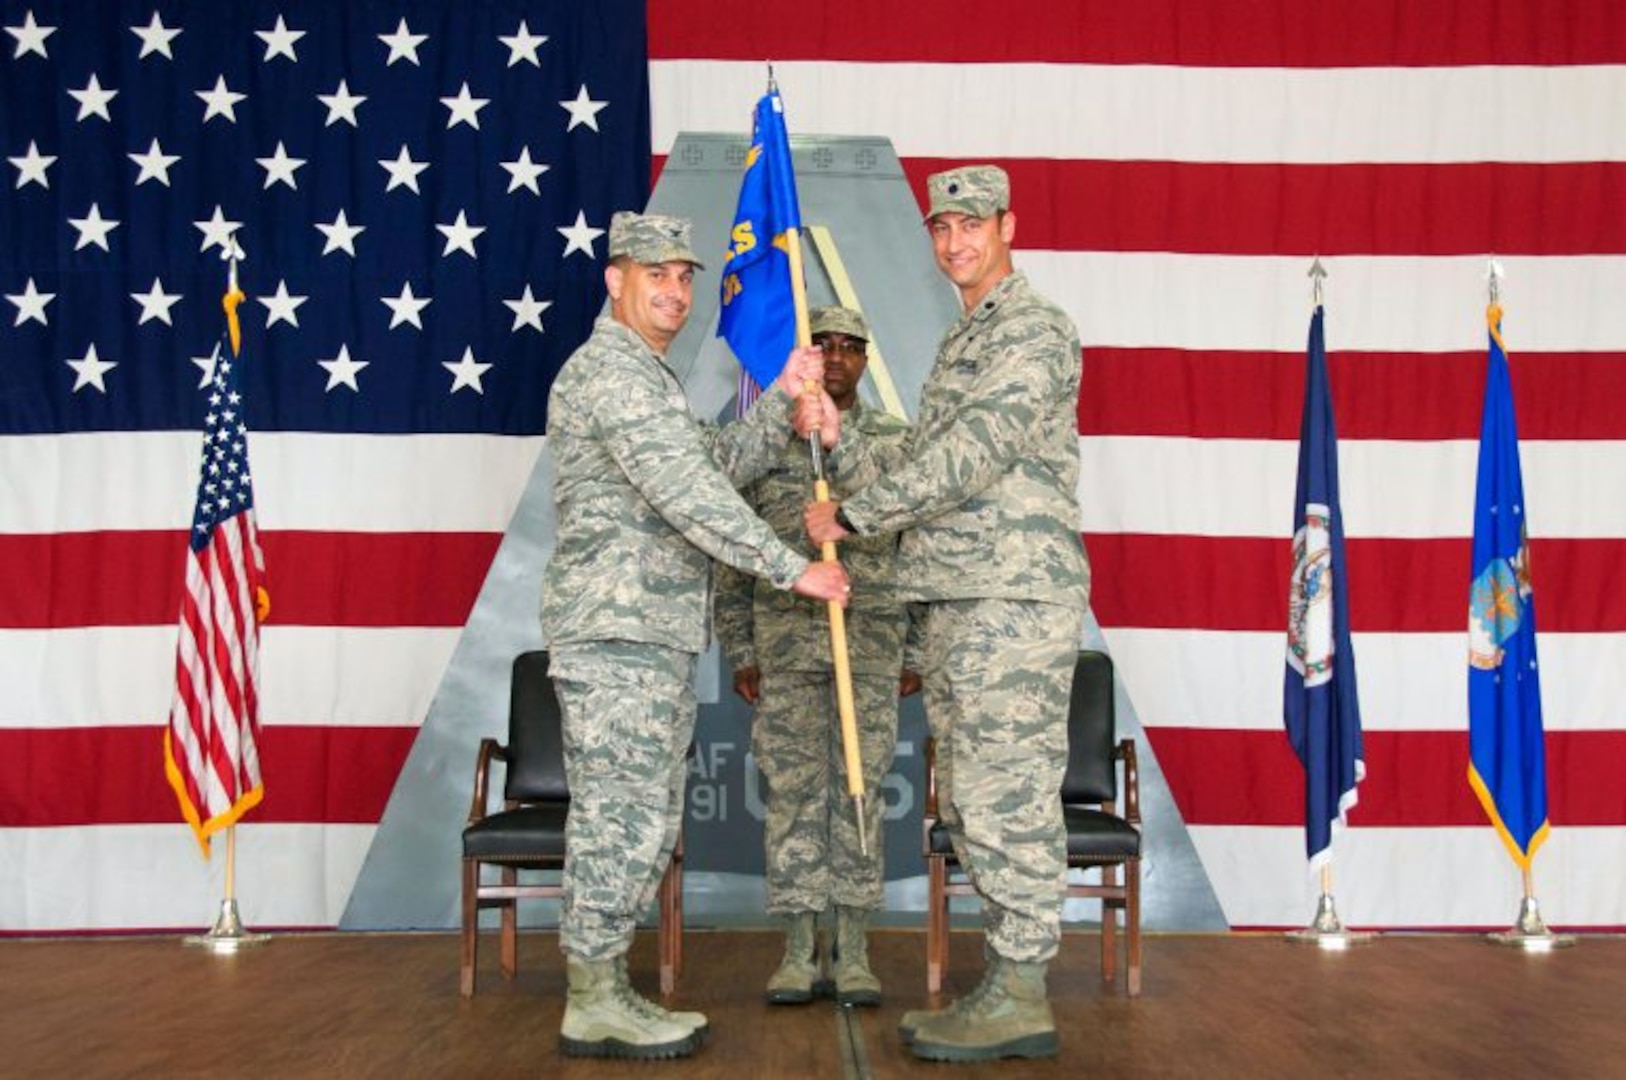 Frodsham assumes command of the 192nd Maintenance Squadron